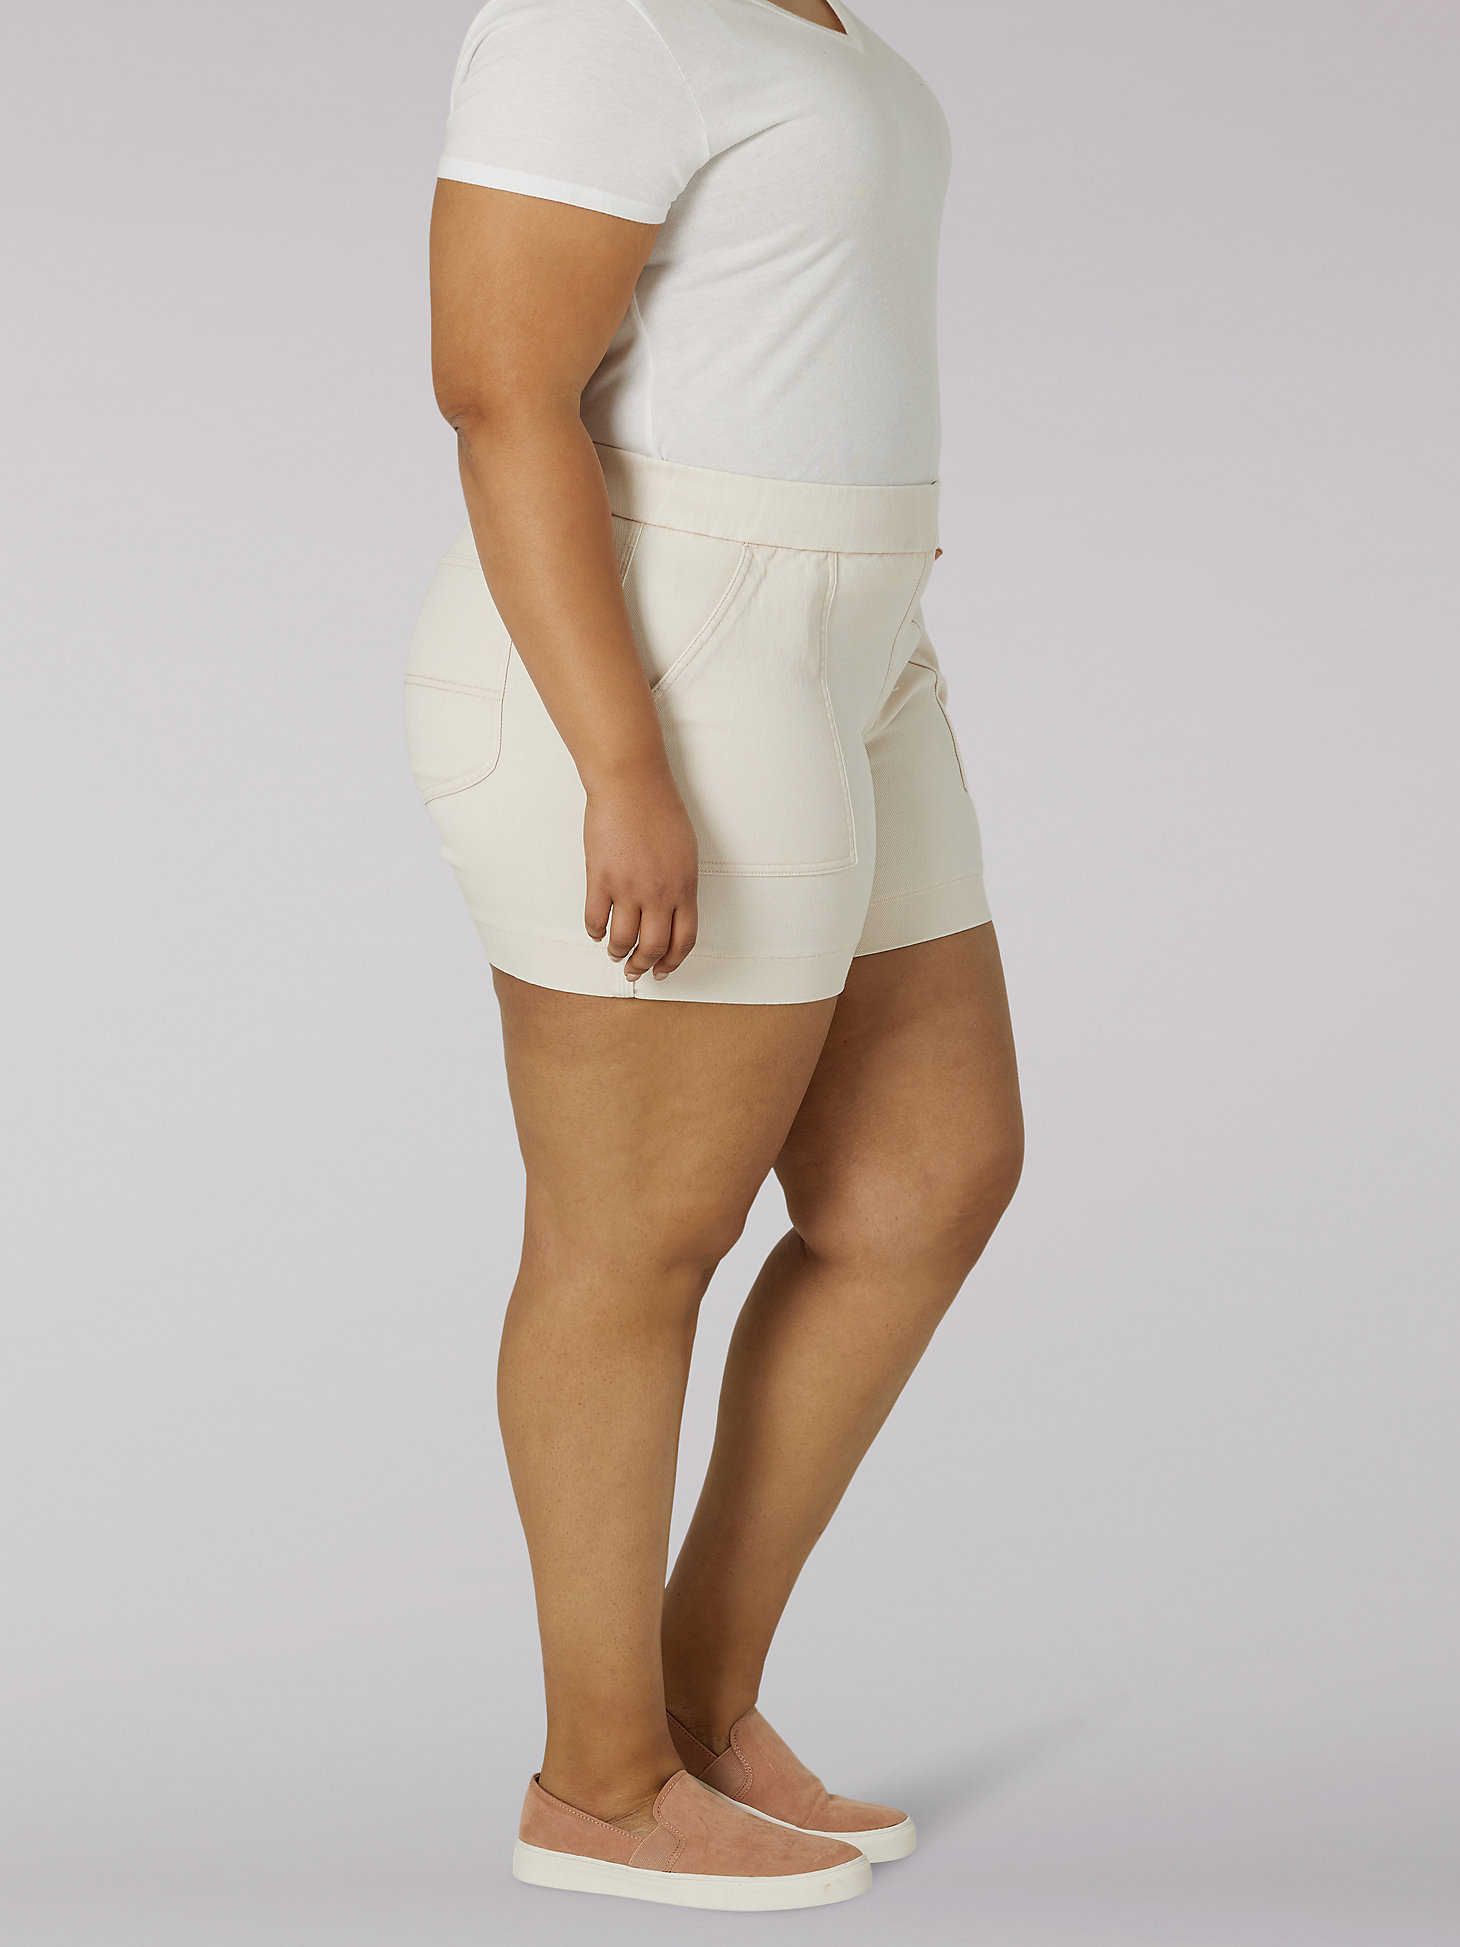 Women's Ultra Lux High Rise Pull-On Utility Short (Plus) in Whitecap Gray alternative view 2